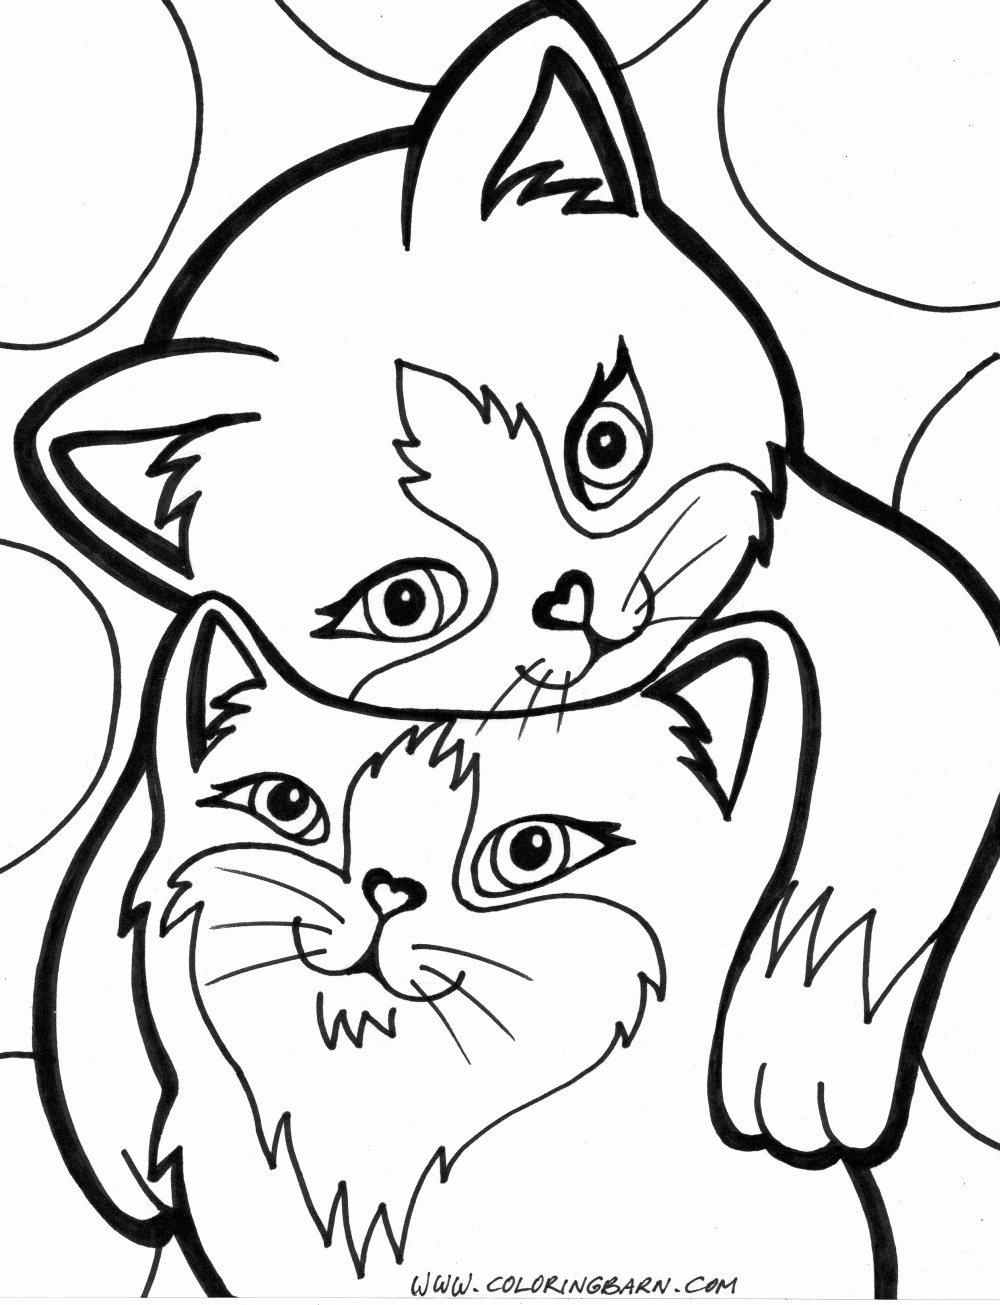 Cat Coloring Pages | Free download on ClipArtMag